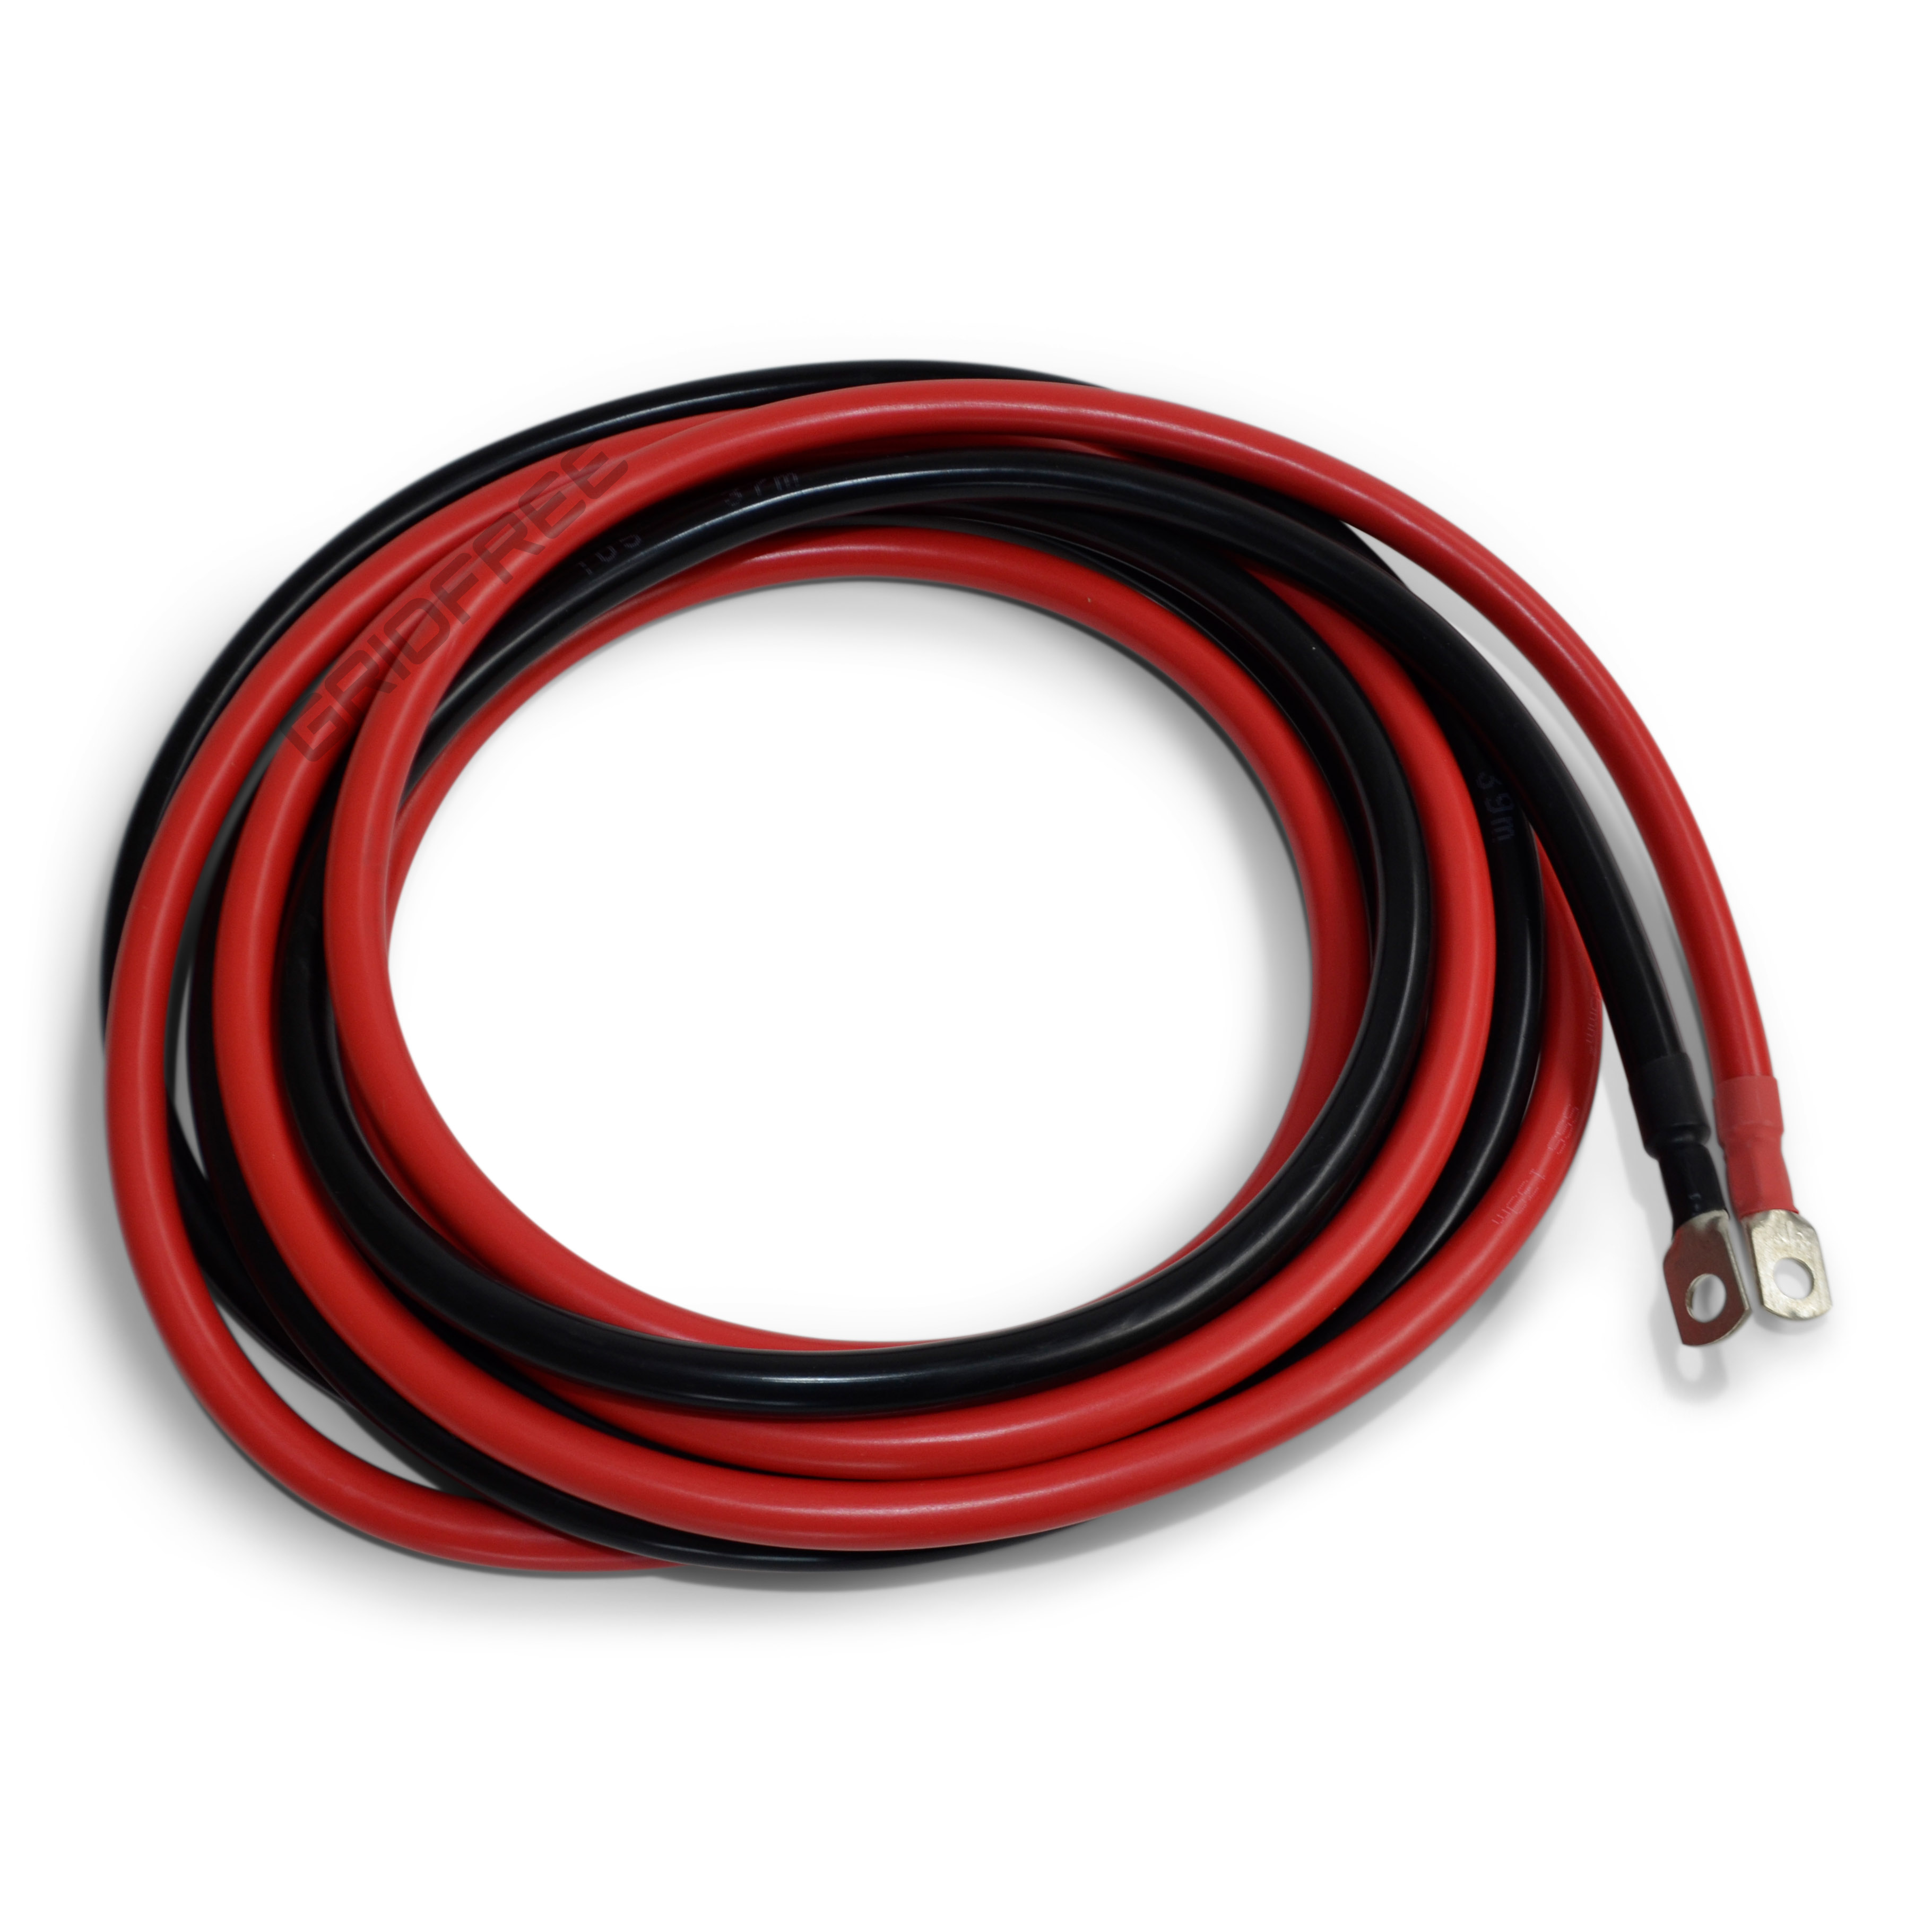 35mm² Pre-Crimped Cable Red&Black - 3m